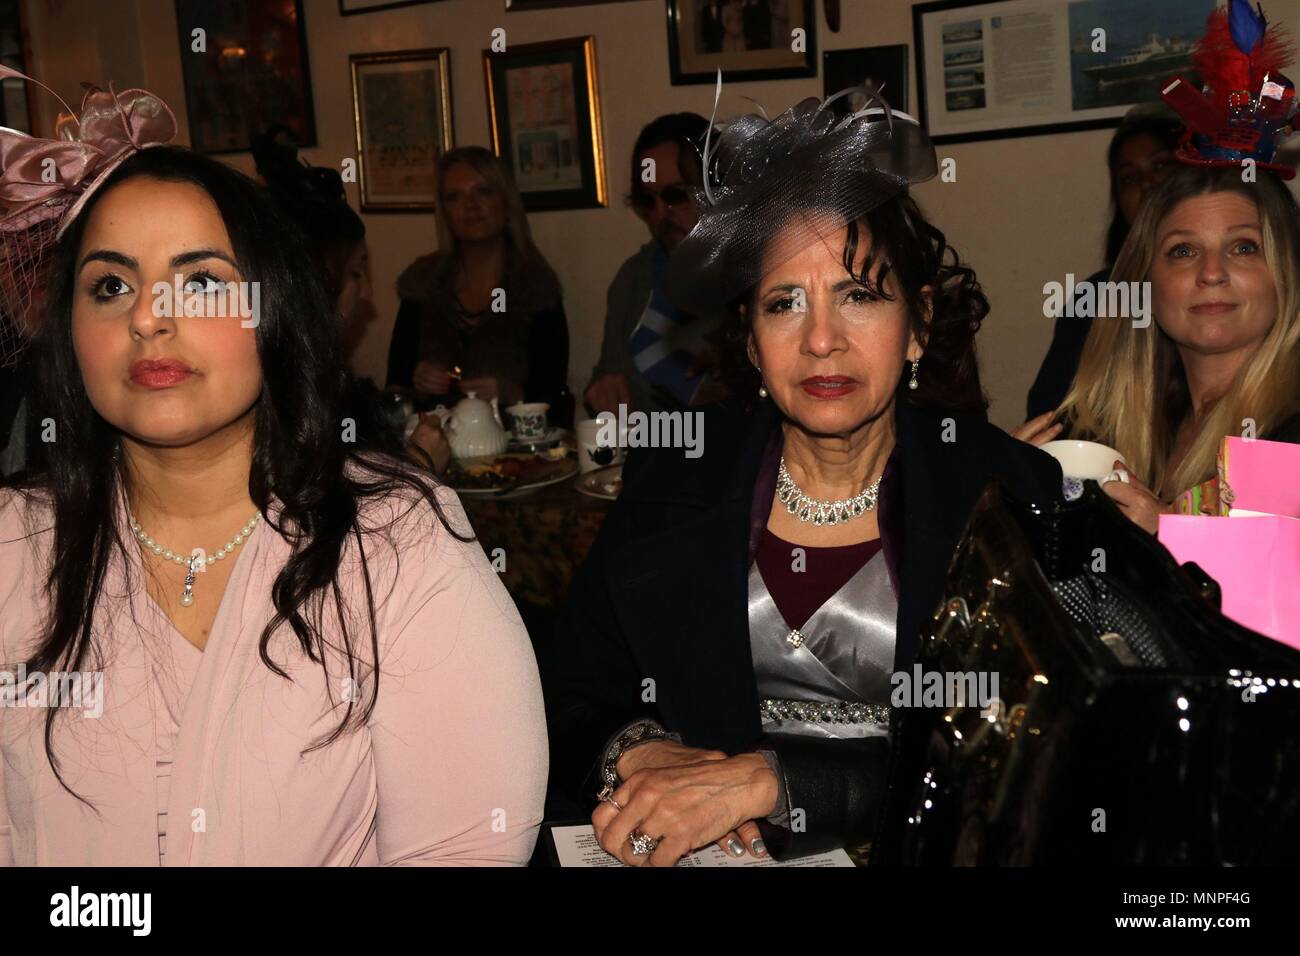 New York, USA. 19th May, 2018. British expatriates packed Tea & Sympathy a British restaurant in New York’s Greenwich Village to view the Royal Wedding of HRH Prince Harry, The Duke of Sussex  to American actress Meghan Markle, now the Duchess of Sussex on May 19, 2018. © 2018 G. Ronald Lopez/DigiPixsAgain.us/Alamy Live New Stock Photo